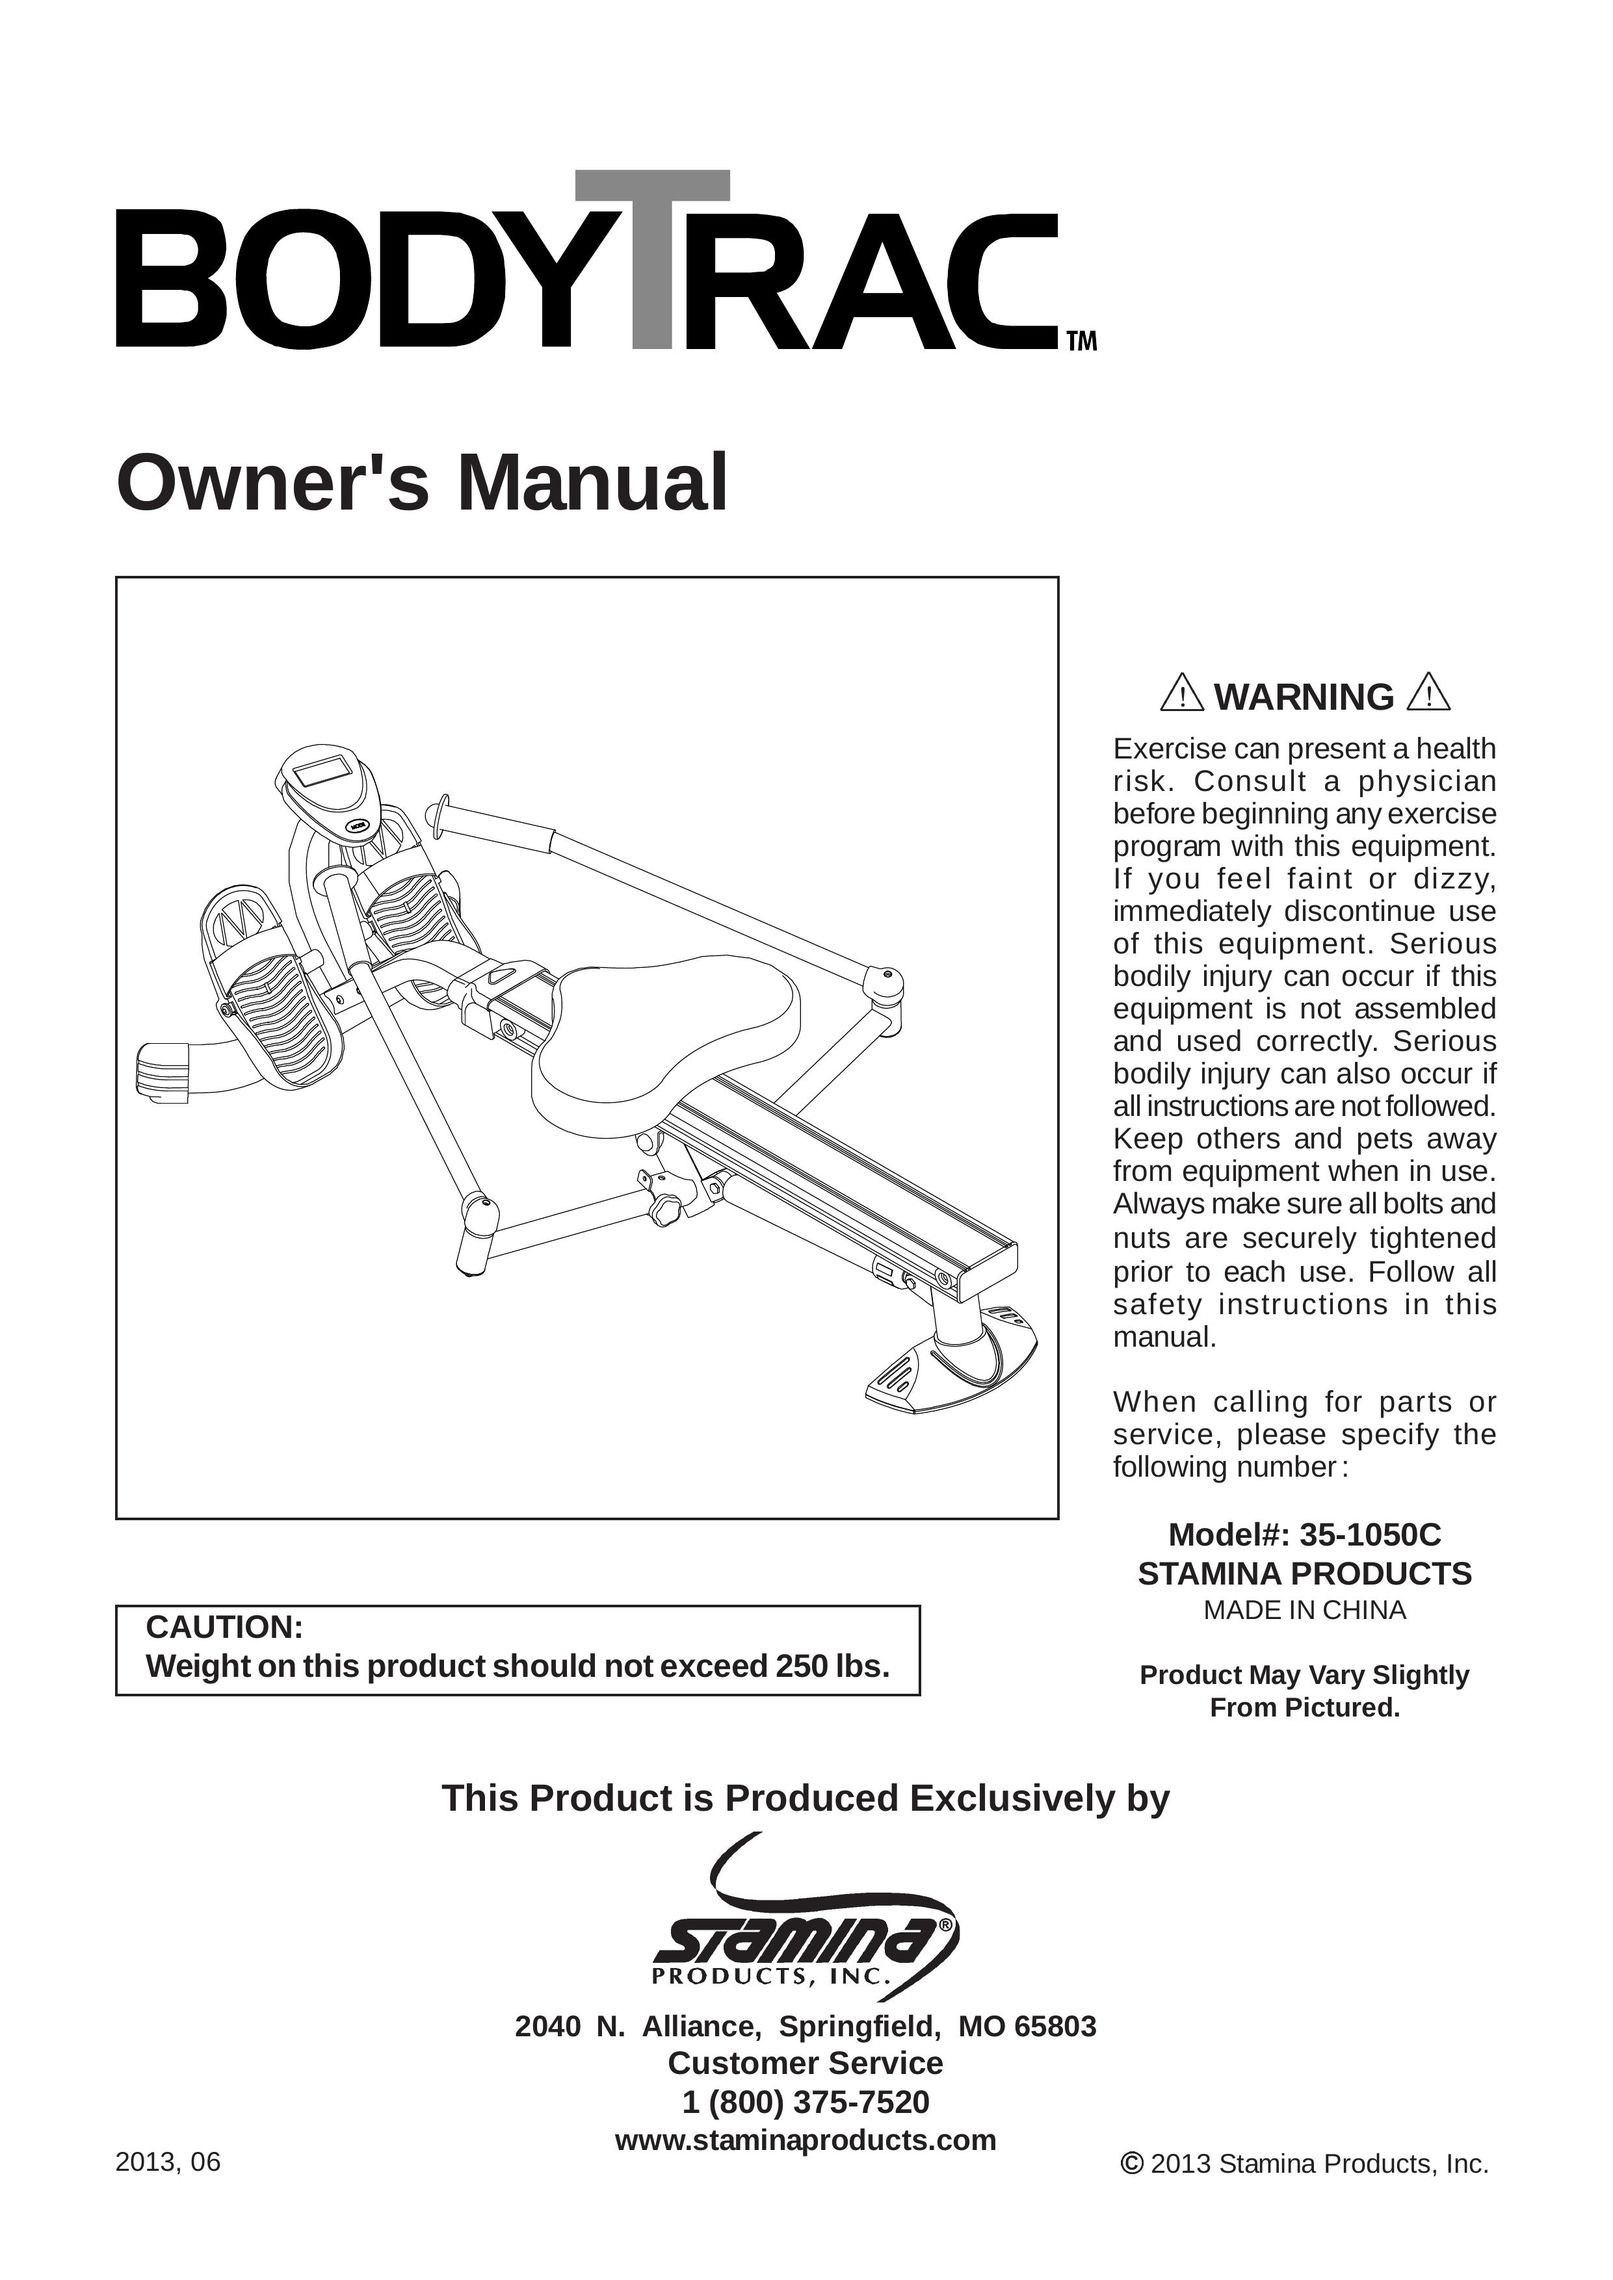 Stamina Products 35-1050C Fitness Equipment User Manual